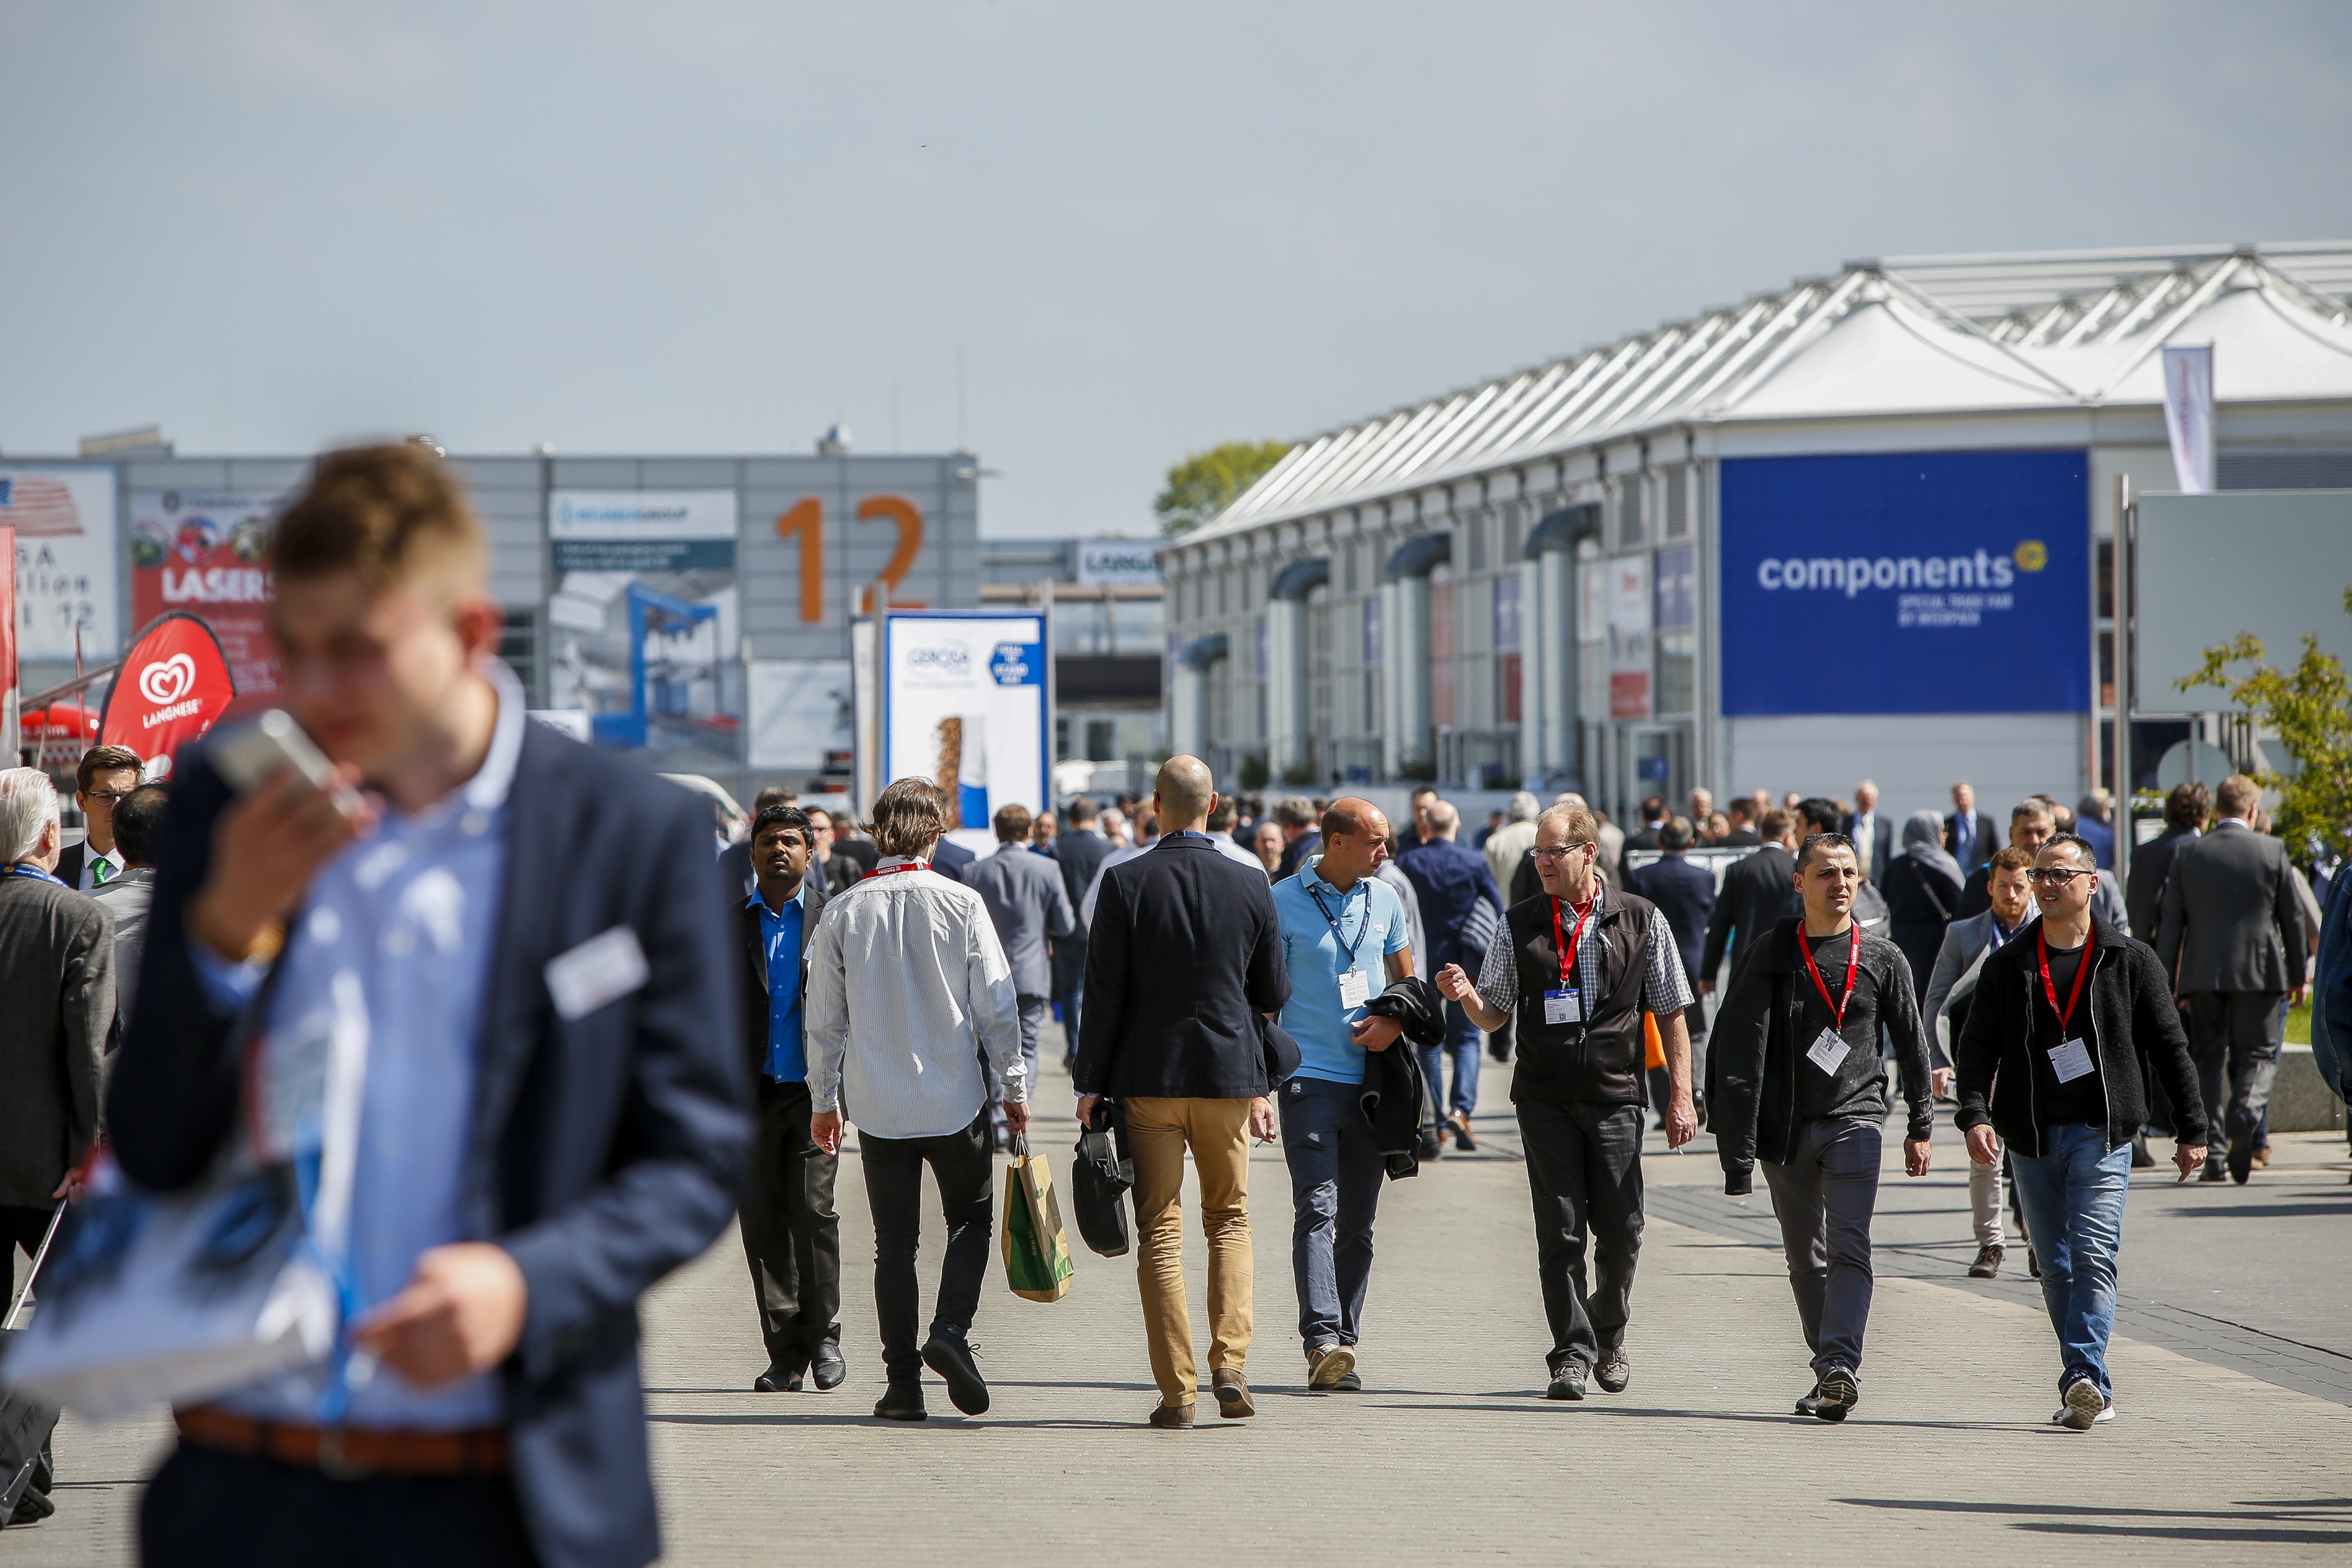 interpack 2023 overview: A trade fair for everyone